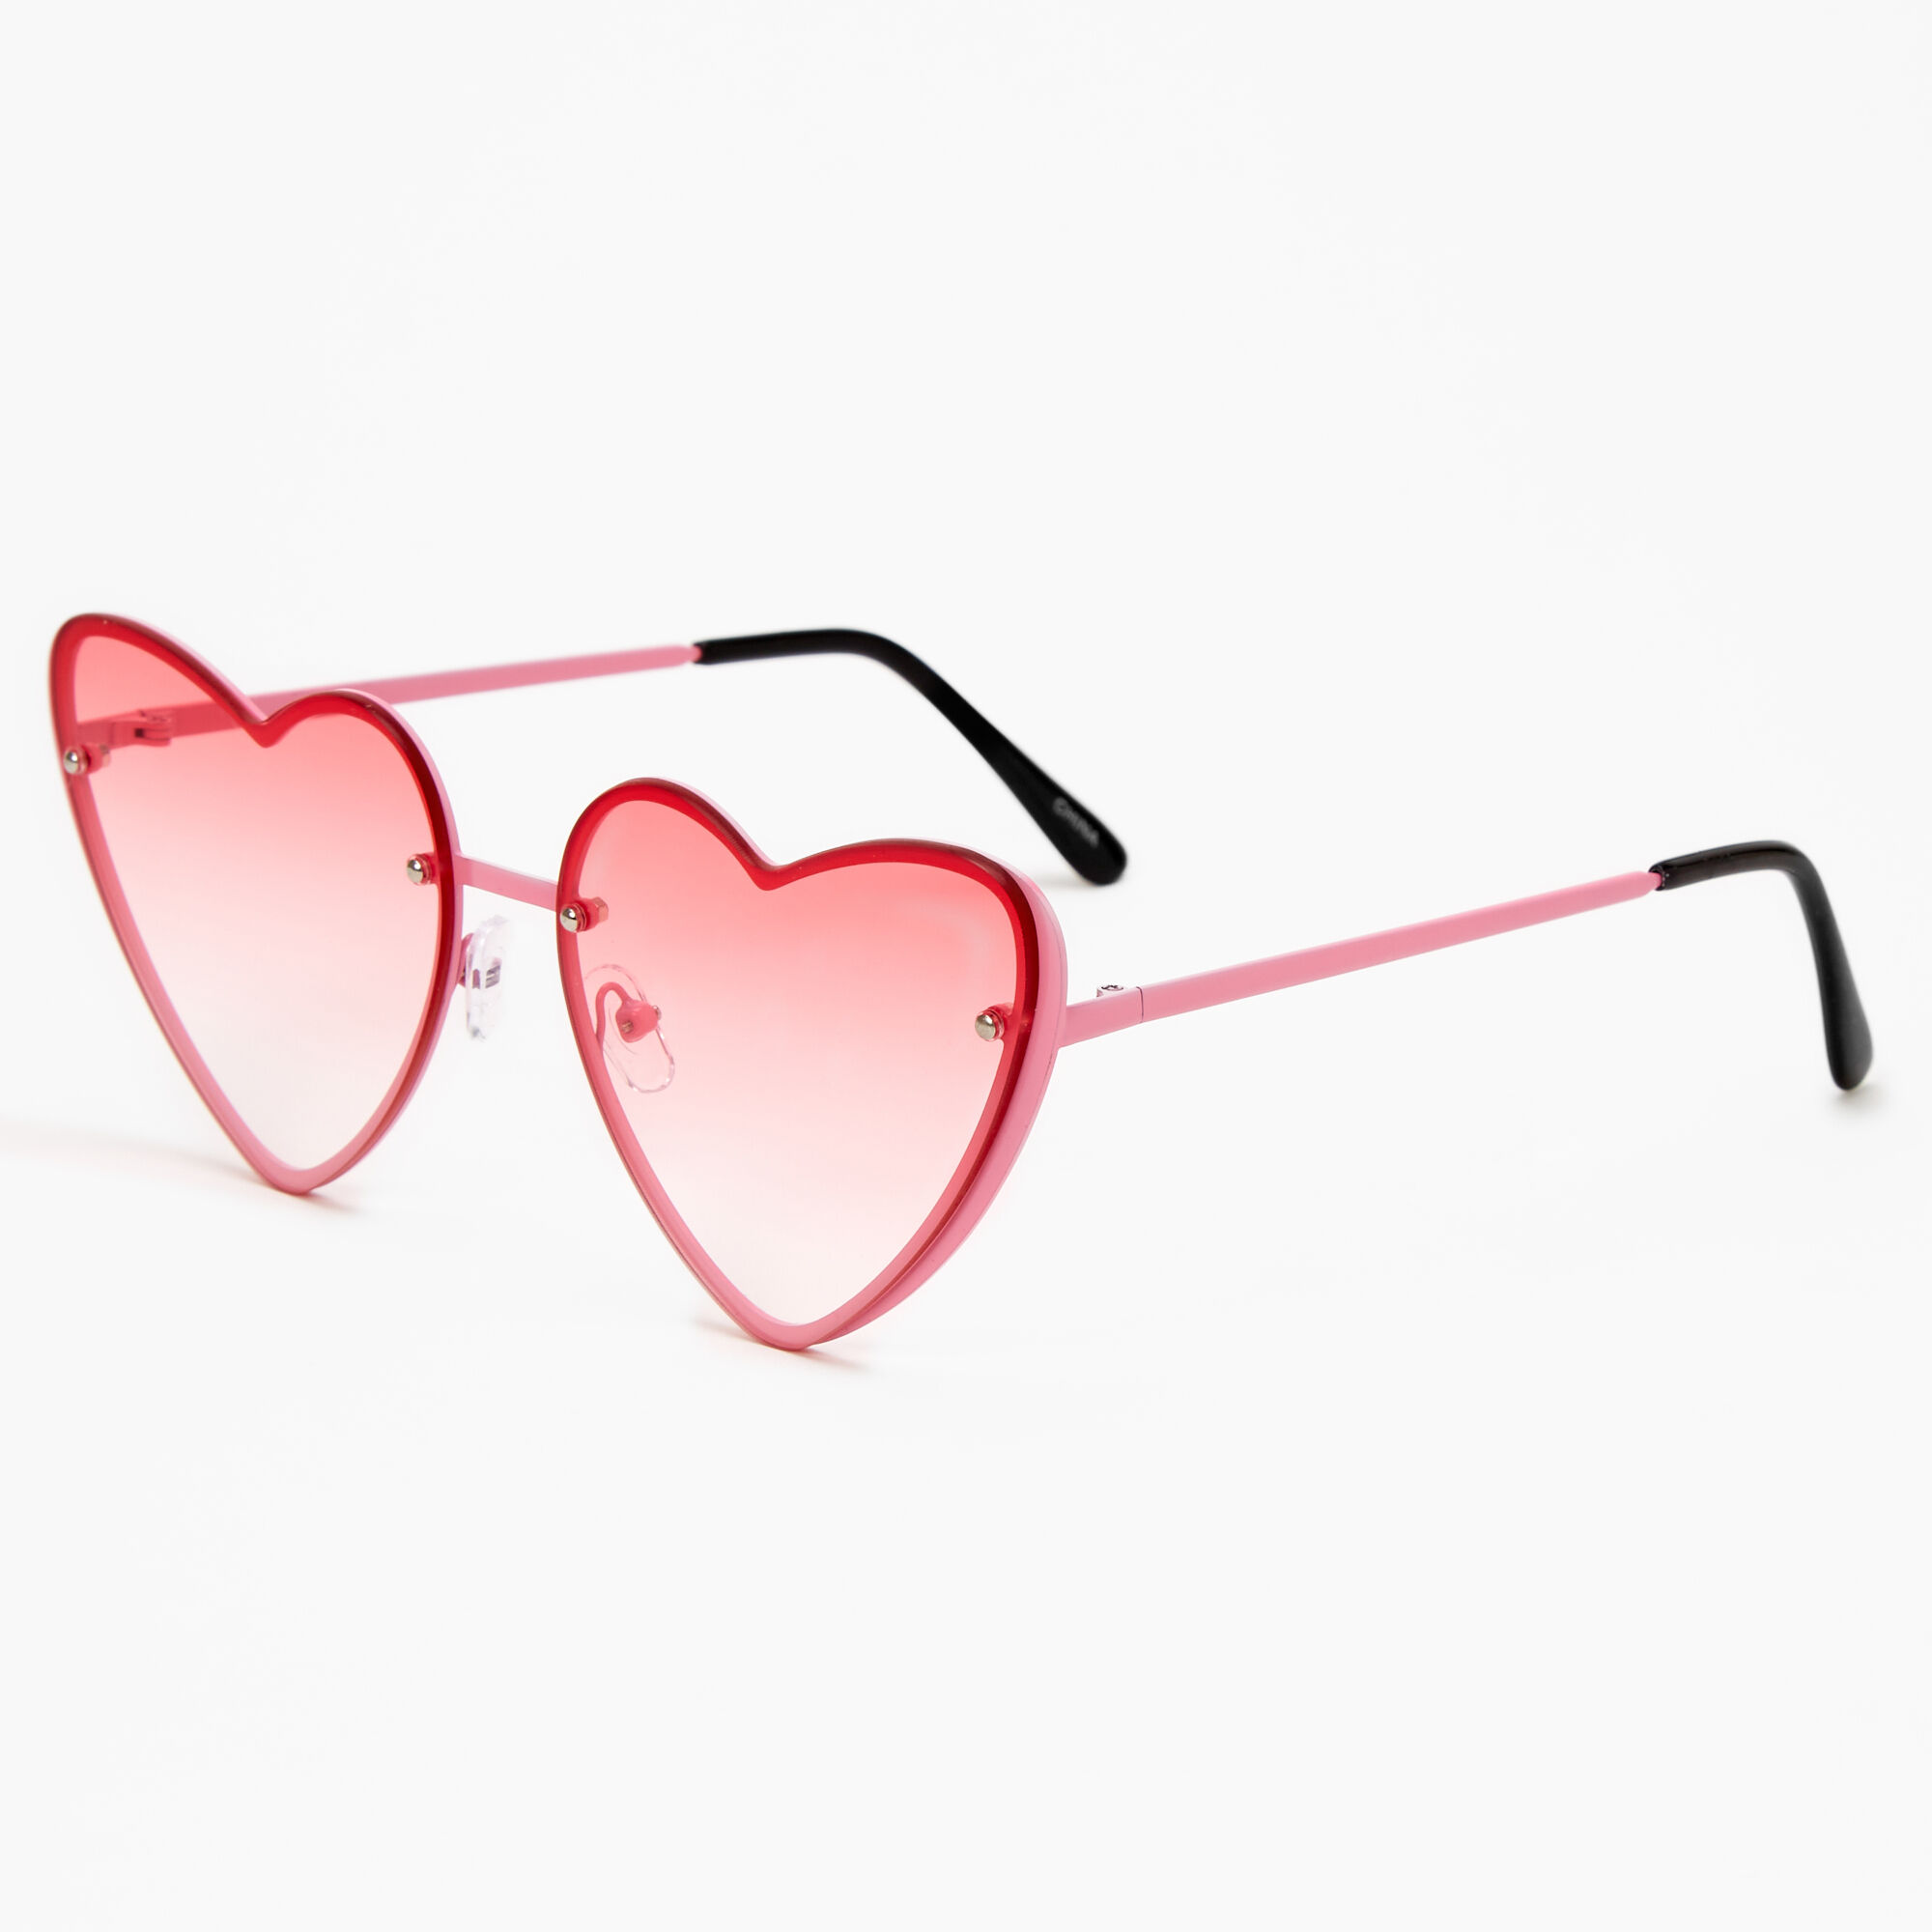 View Claires Ombre Heart Sunglasses Pink information